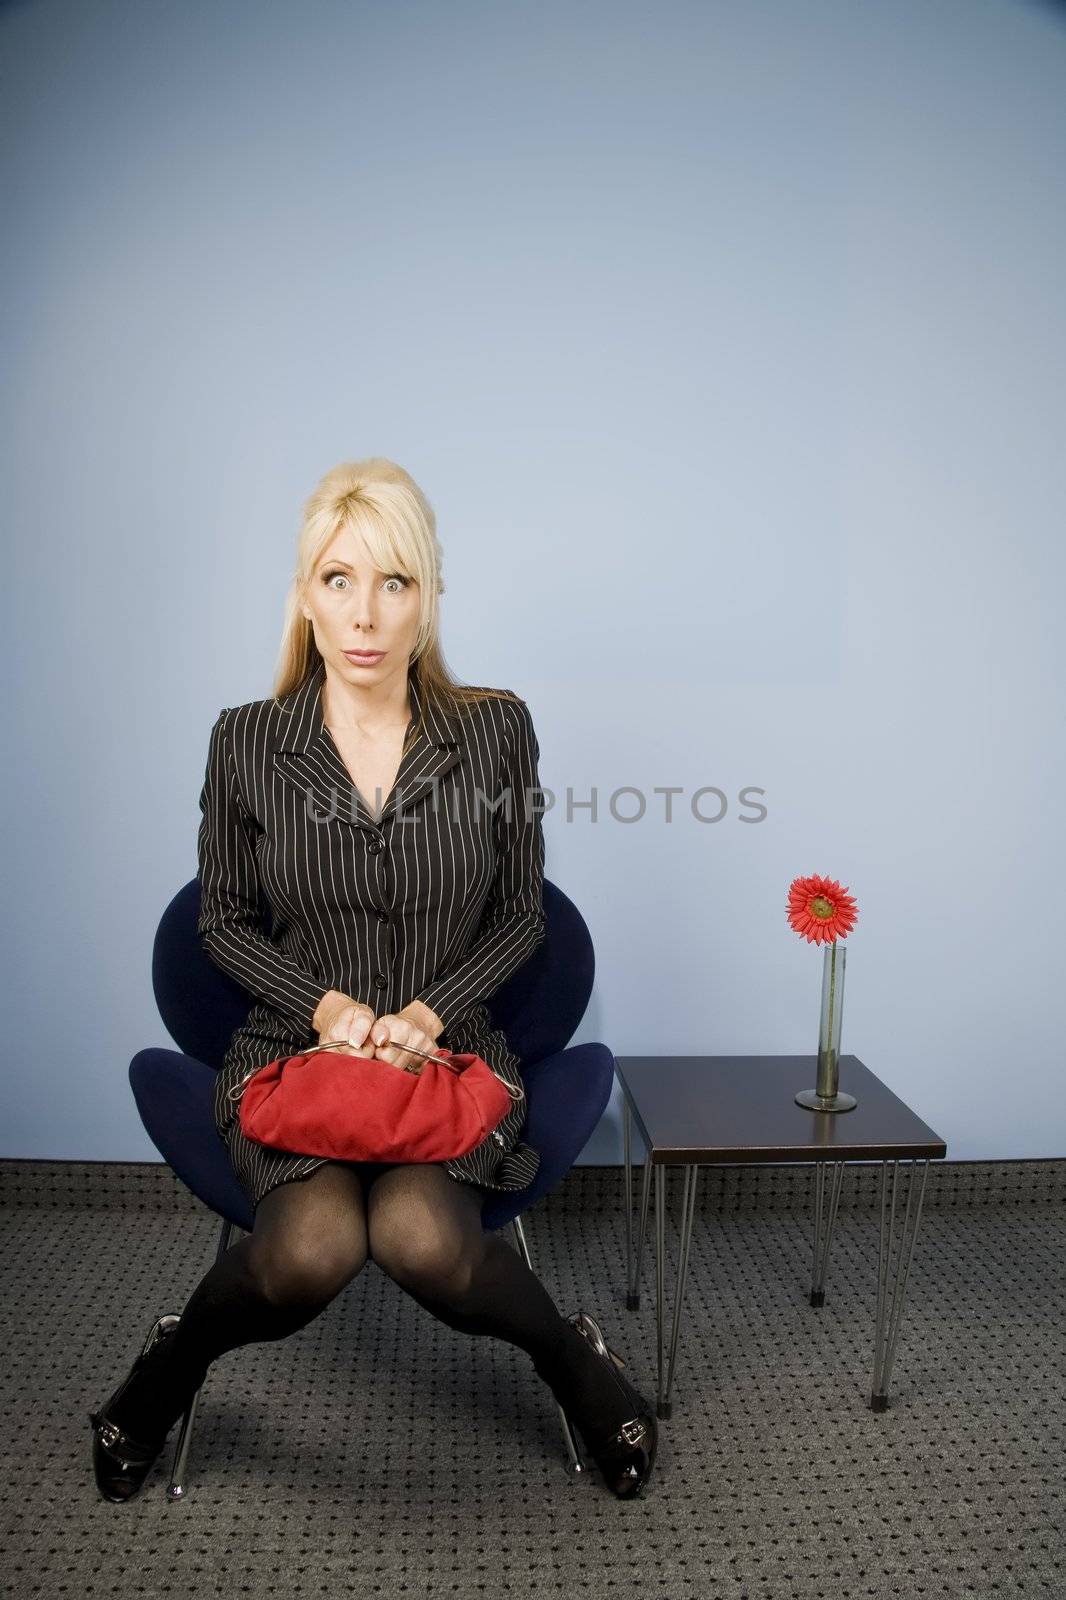 Apprehensive woman sitting waiting in an office chair  by Creatista